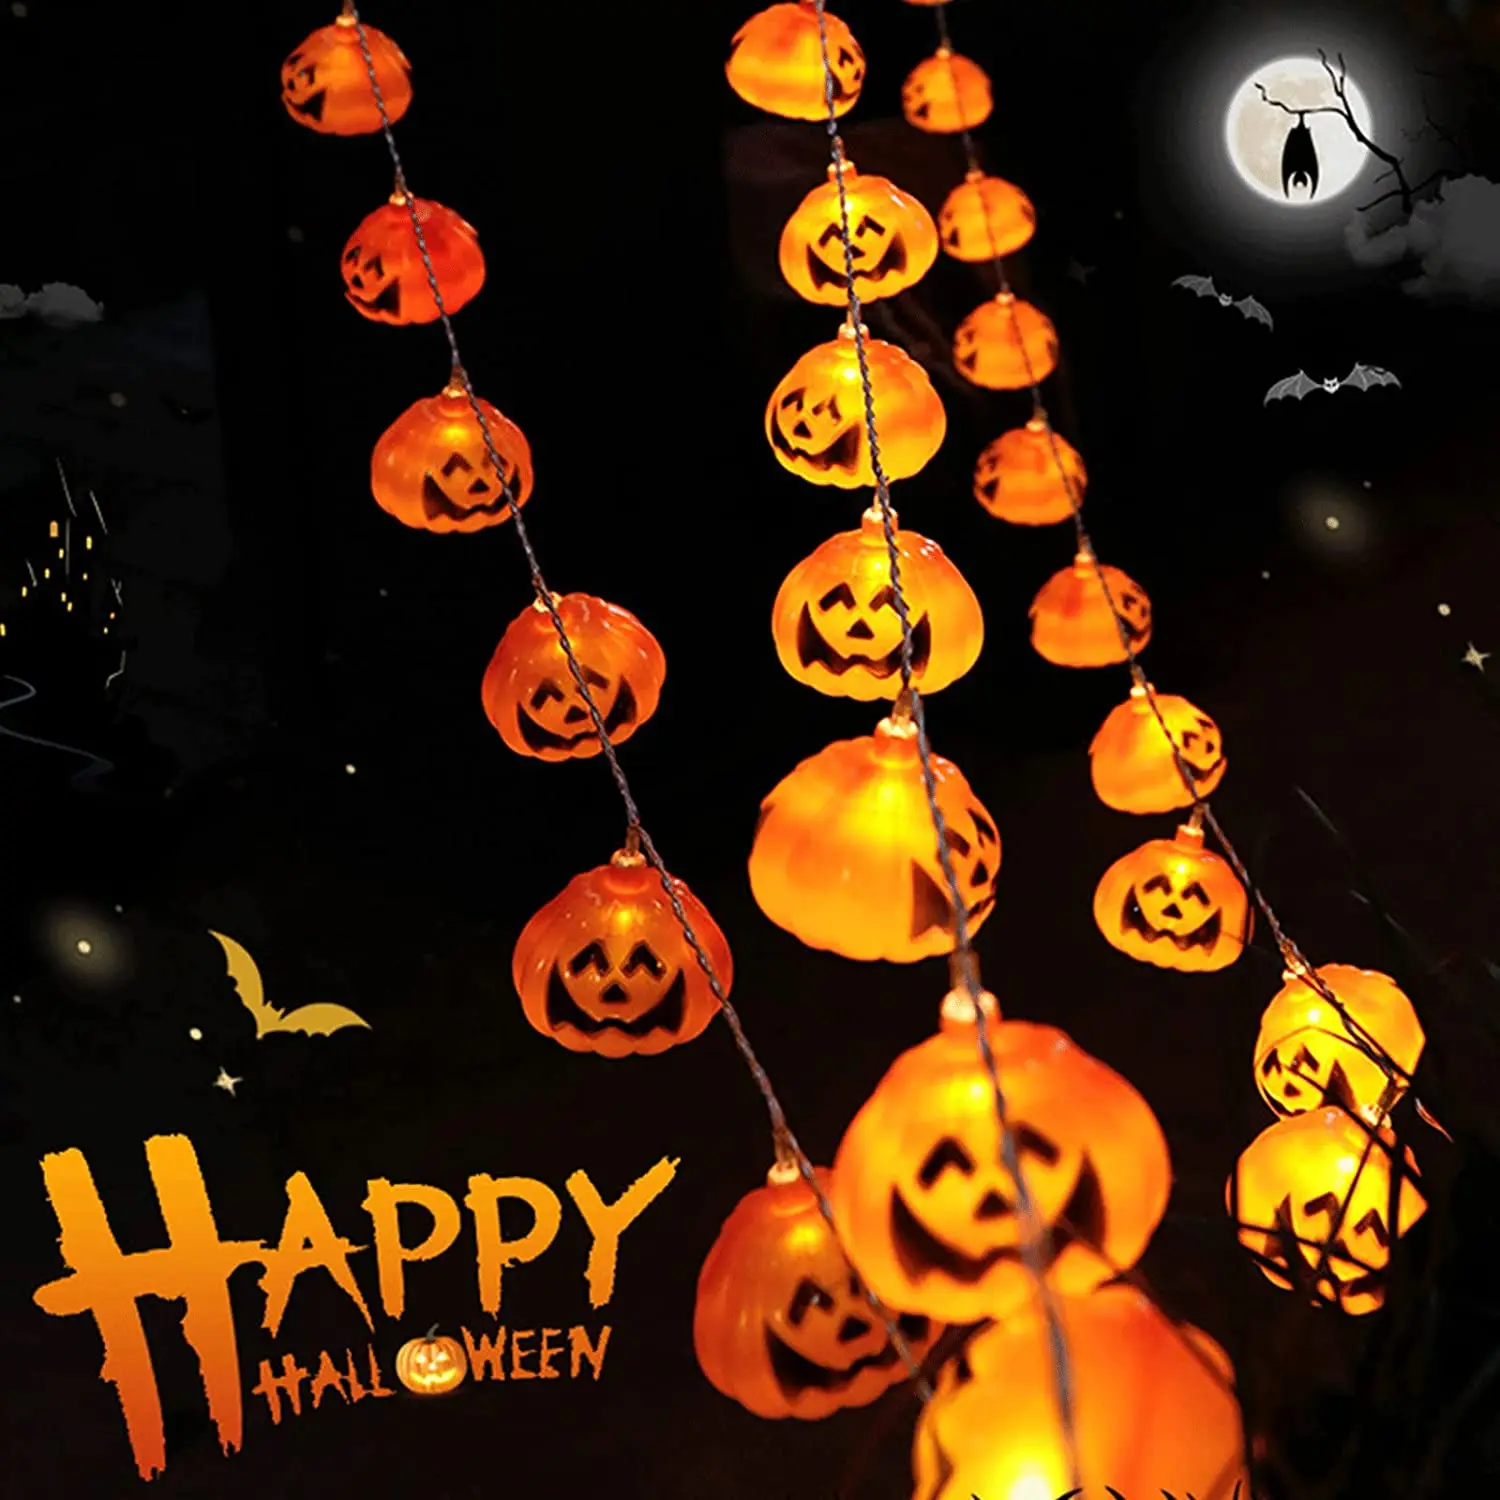 

Halloween String Lights, Pumpkin Lights String with 2 Modes Steady/Flashing Light for Indoor/Outdoor Decor, Halloween Decoration